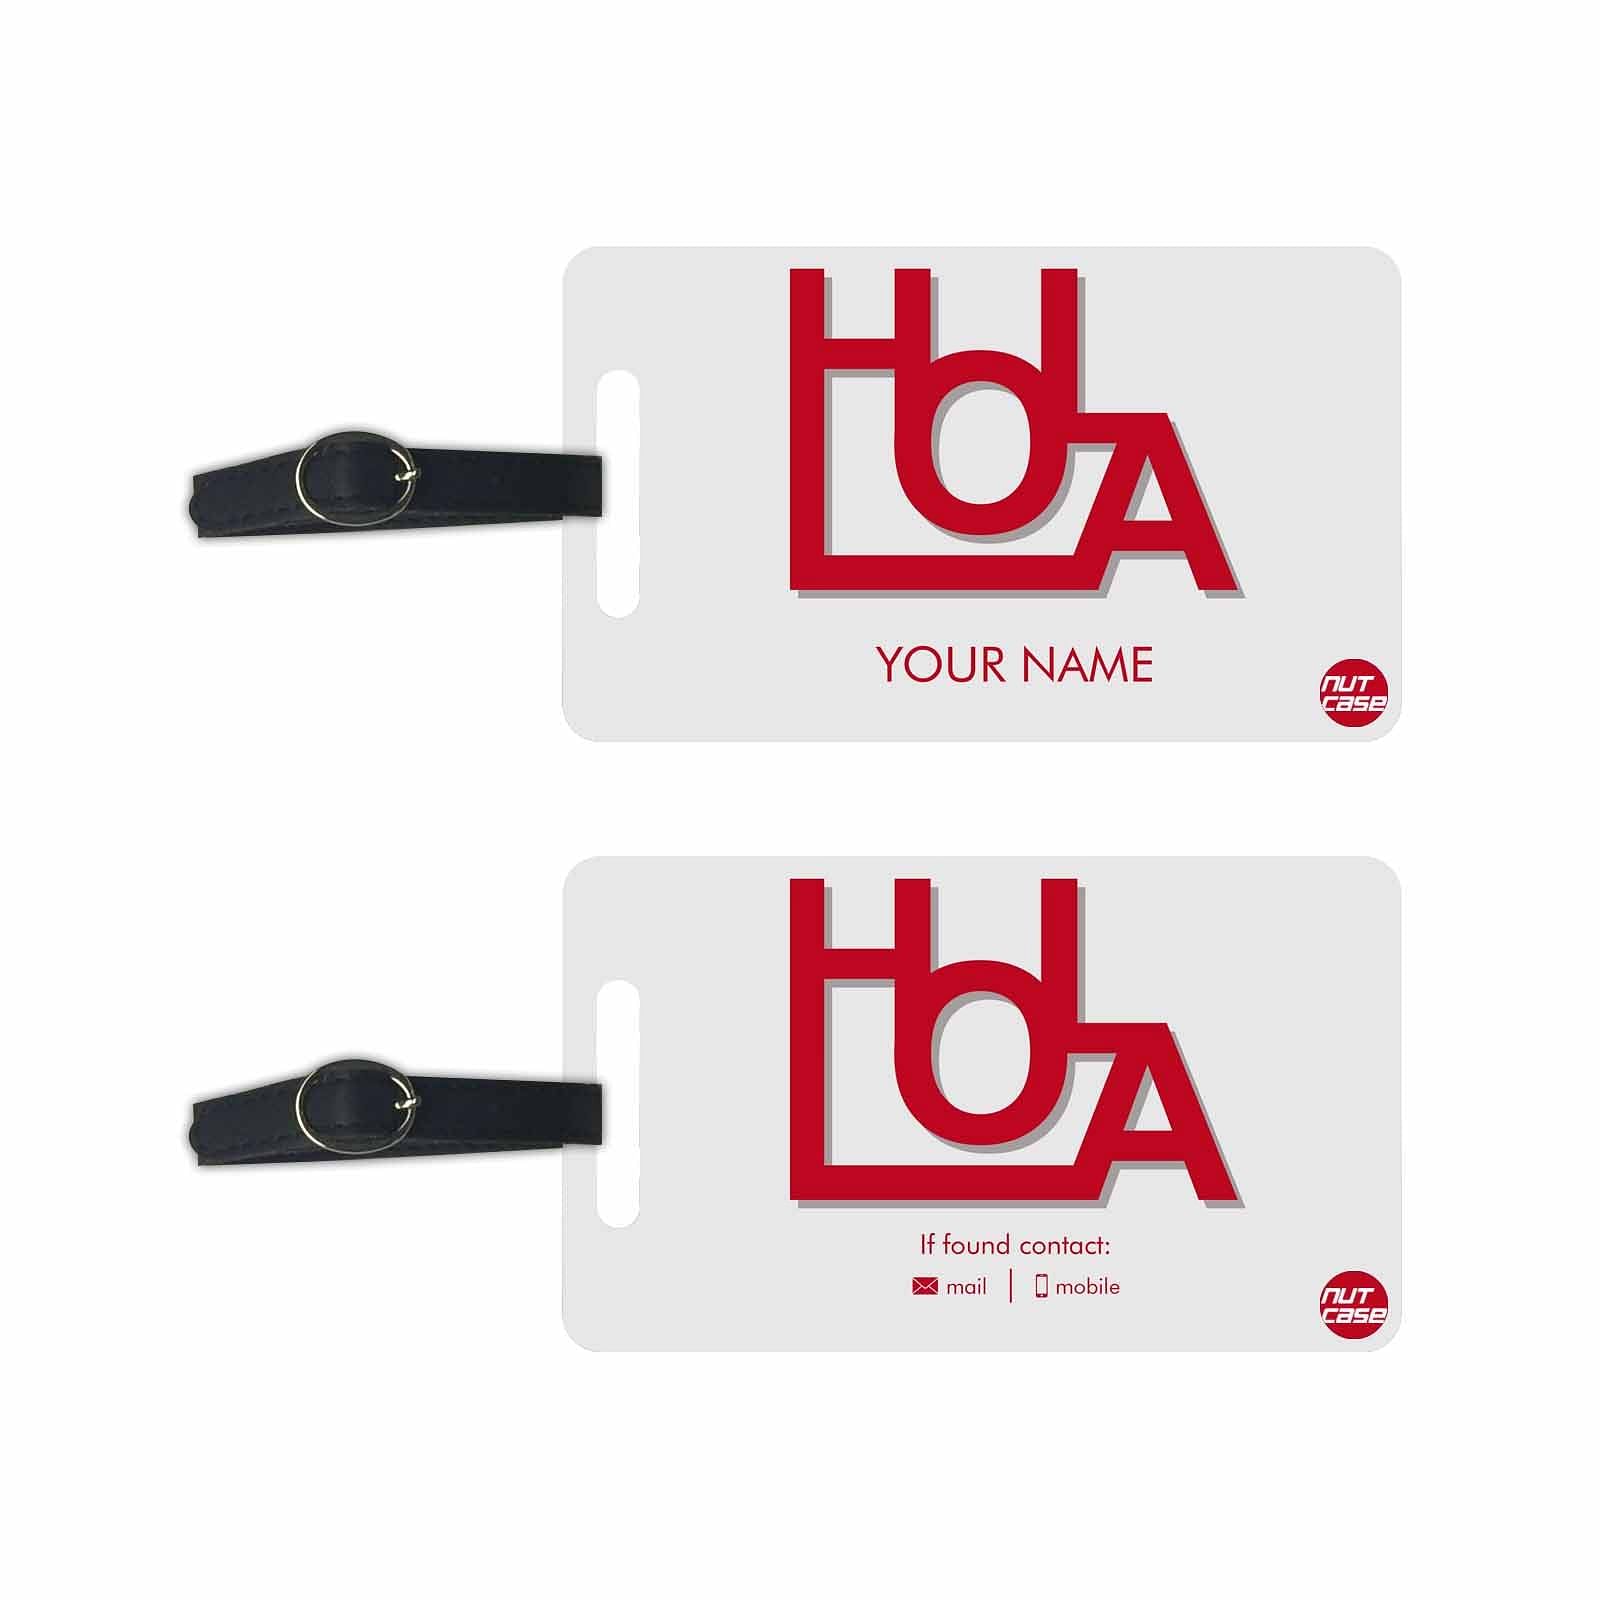 New Customized Travel Luggage Tag - Add your Name - Set of 2 Nutcase